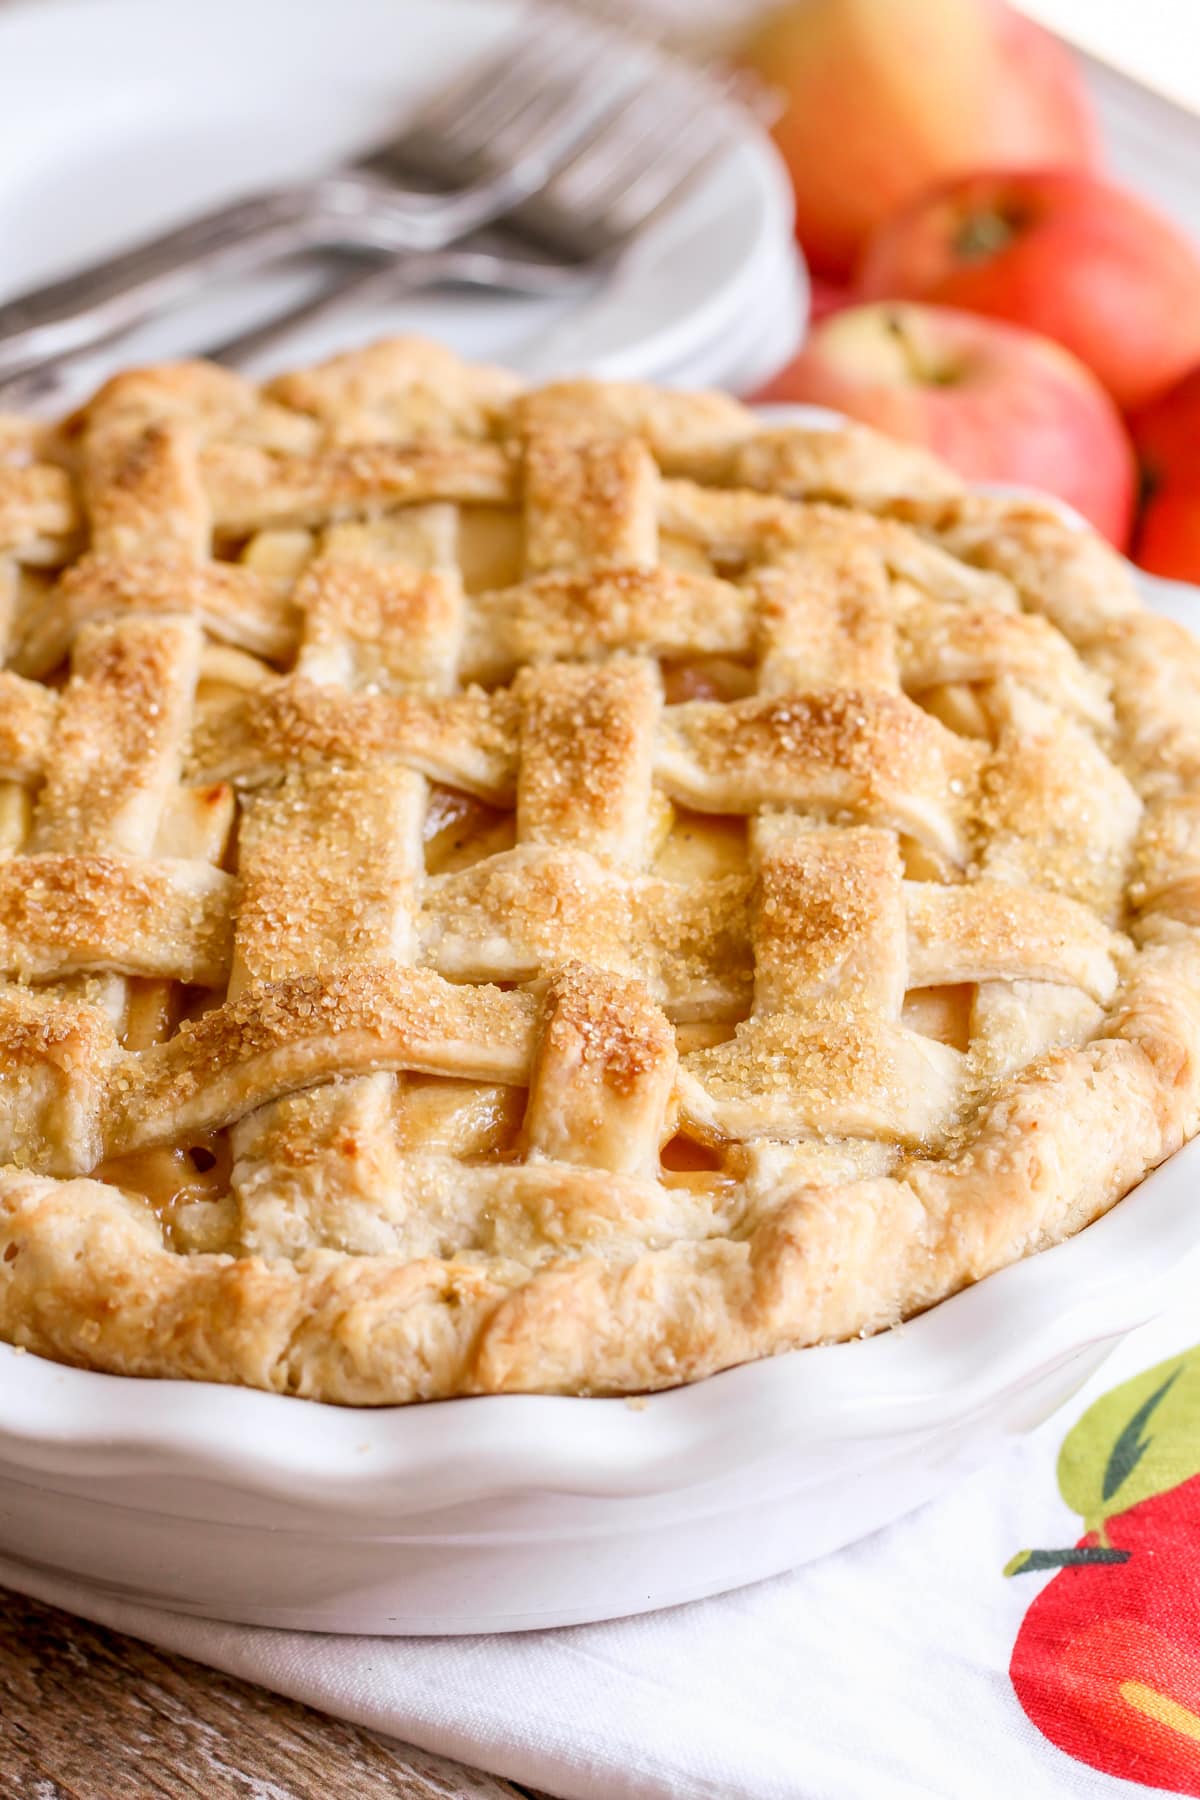 Homemade Apple Pie recipe close up image served in a pie dish.